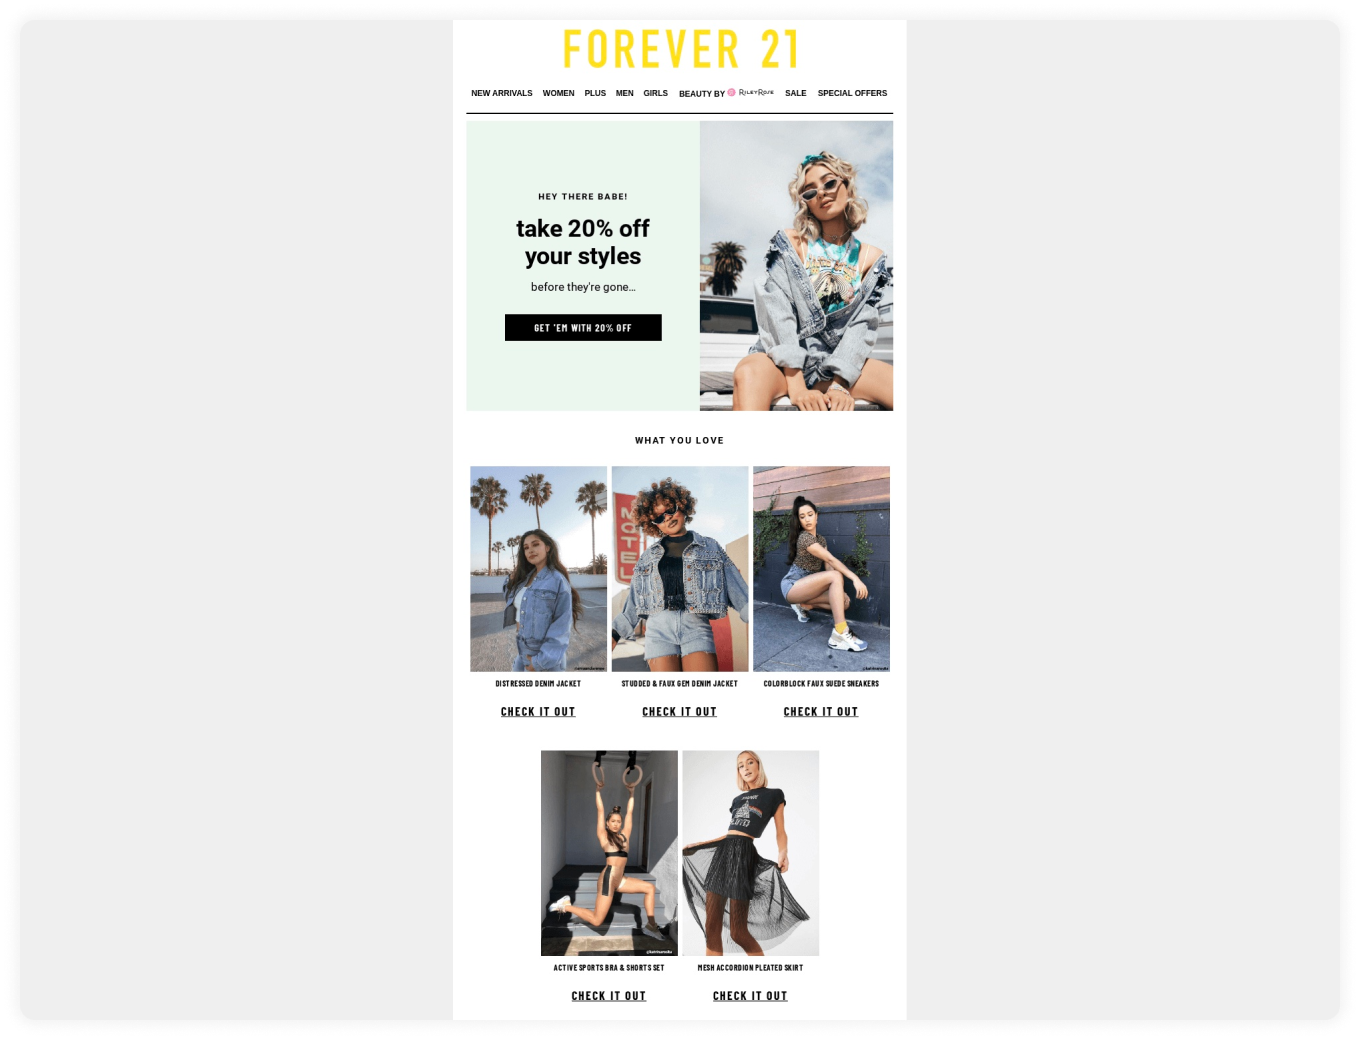 Promotional email by Forever 21